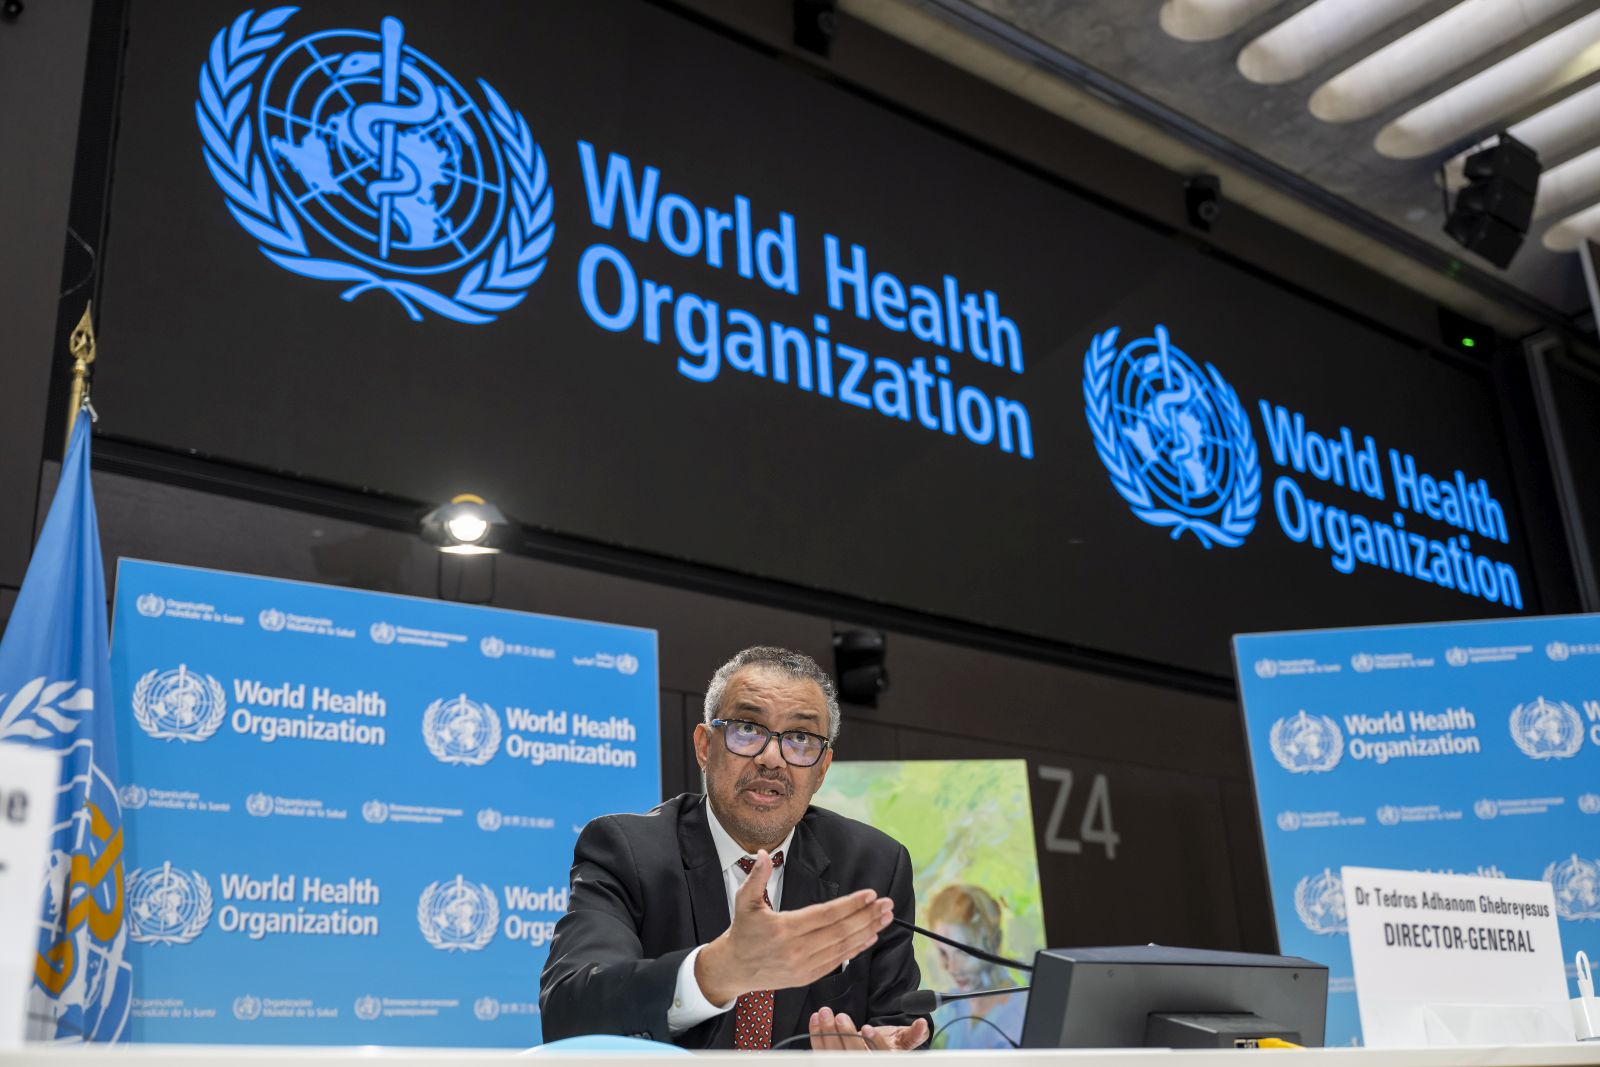 epa10561588 Director General of the World Health Organization (WHO) Tedros Adhanom Ghebreyesus speaks to journalists during a press conference about the Global WHO on World Health Day and the organization's 75th anniversary at the WHO headquarters in Geneva, Switzerland, 06 April 2023. The WHO marks the 75th anniversary of its founding on 07 April.  EPA/MARTIAL TREZZINI